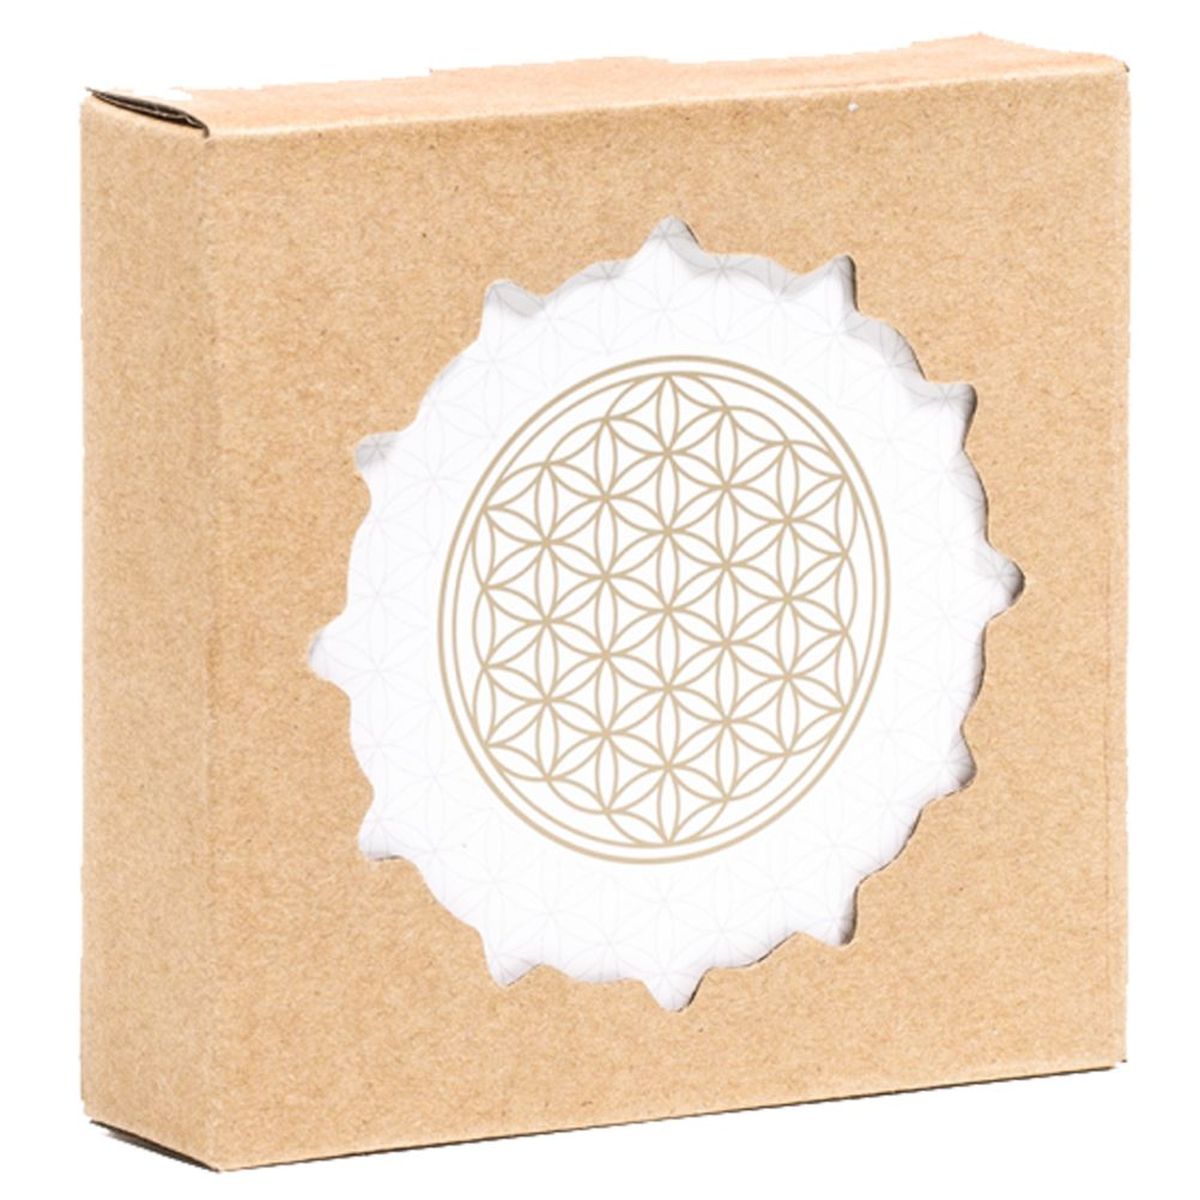 Flower of Life Set of 6 coasters